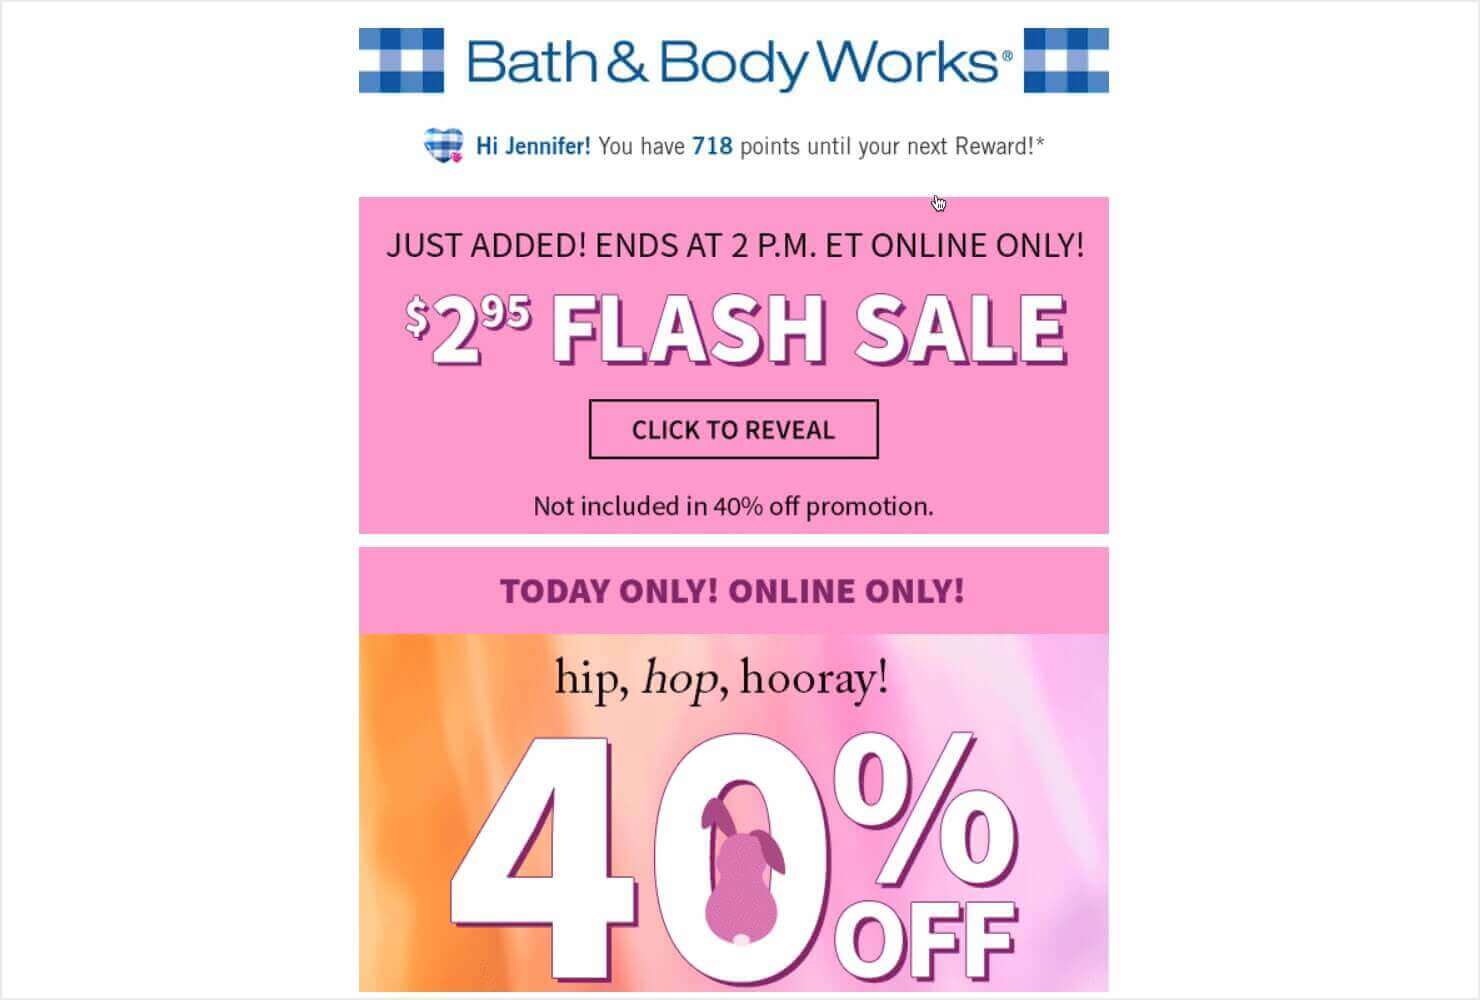 Email from Bath & BodyWorks. It starts "Just Added! Ends at 2 pm ET Online Only! '.95 FLASH SALE." There's a button that says "Click to reveal." Below, the 40% off graphic from the announcement email is repeated.